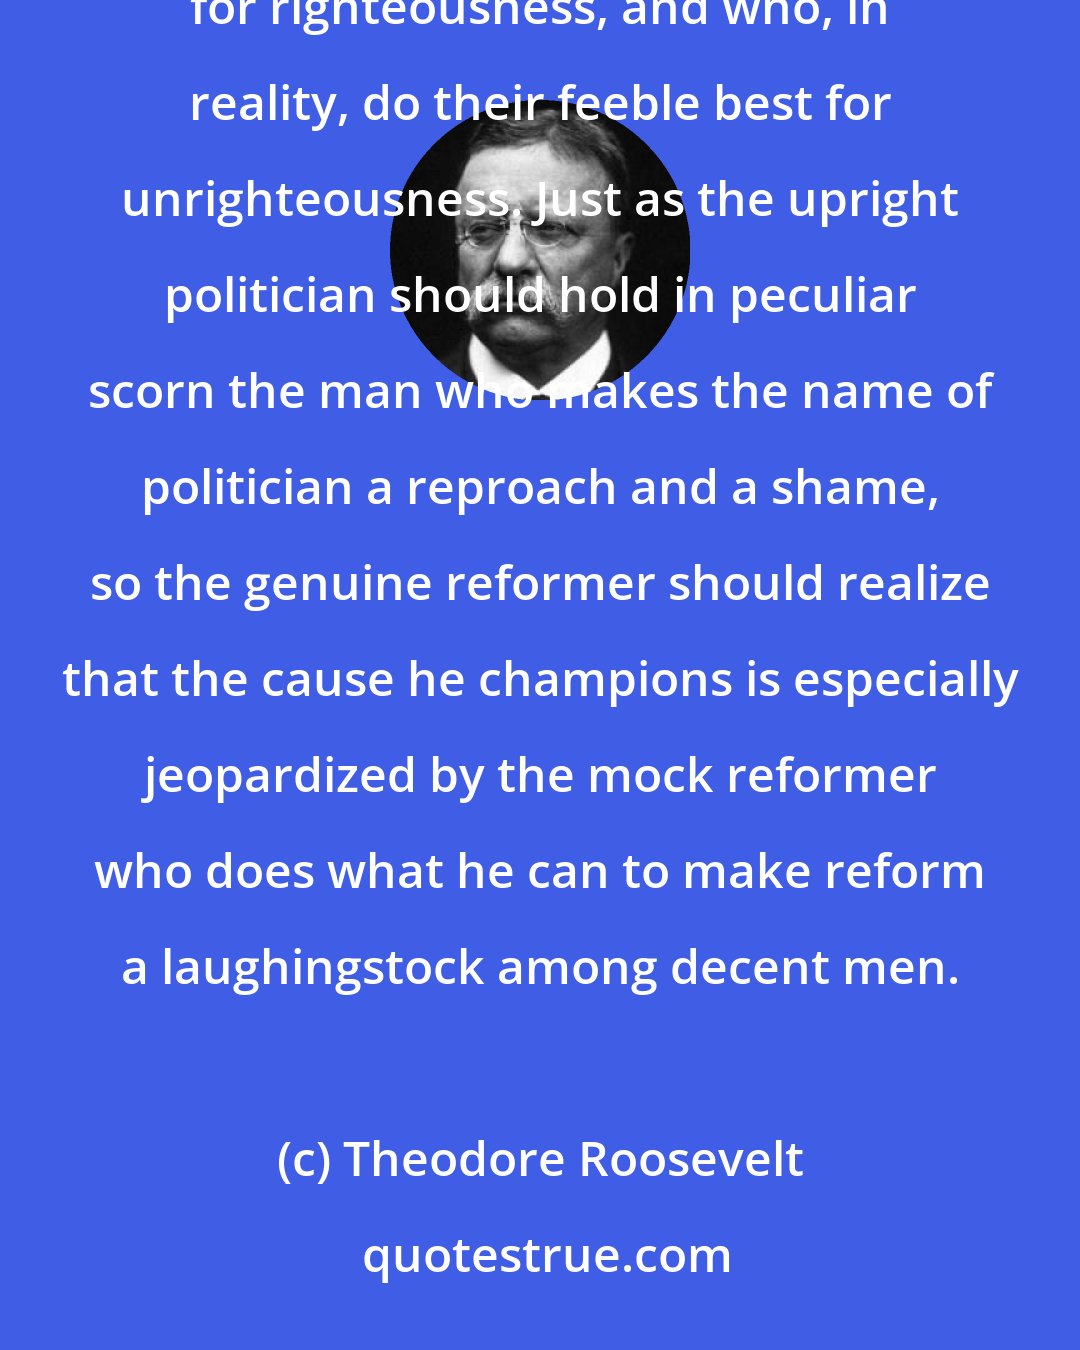 Theodore Roosevelt: In every community there are little knots of fantastic extremists who loudly proclaim that they are striving for righteousness, and who, in reality, do their feeble best for unrighteousness. Just as the upright politician should hold in peculiar scorn the man who makes the name of politician a reproach and a shame, so the genuine reformer should realize that the cause he champions is especially jeopardized by the mock reformer who does what he can to make reform a laughingstock among decent men.